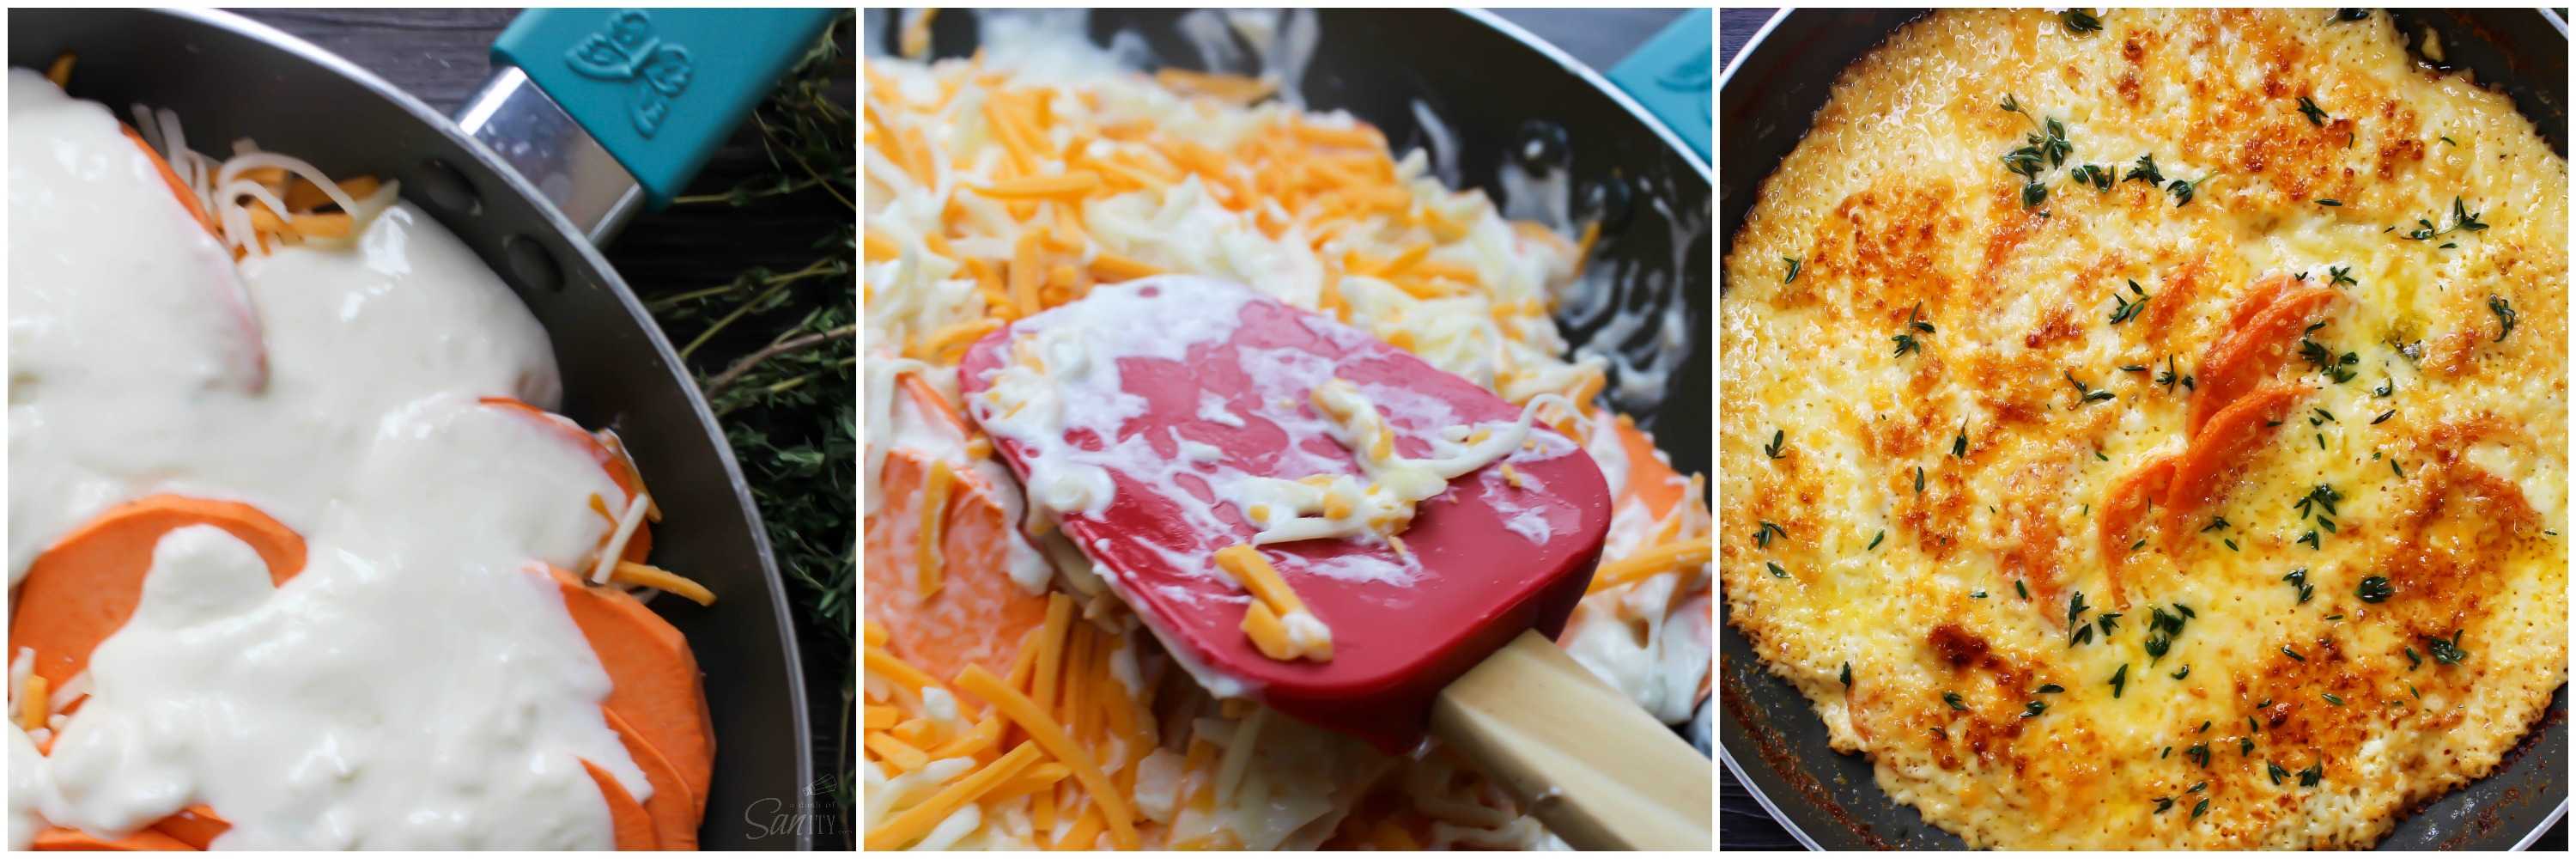 Skillet Scalloped Sweet Potatoes is an elegant twist on a holiday classic of Scalloped Potatoes. Layers of sweet potatoes, cheese, and a white cream sauce.